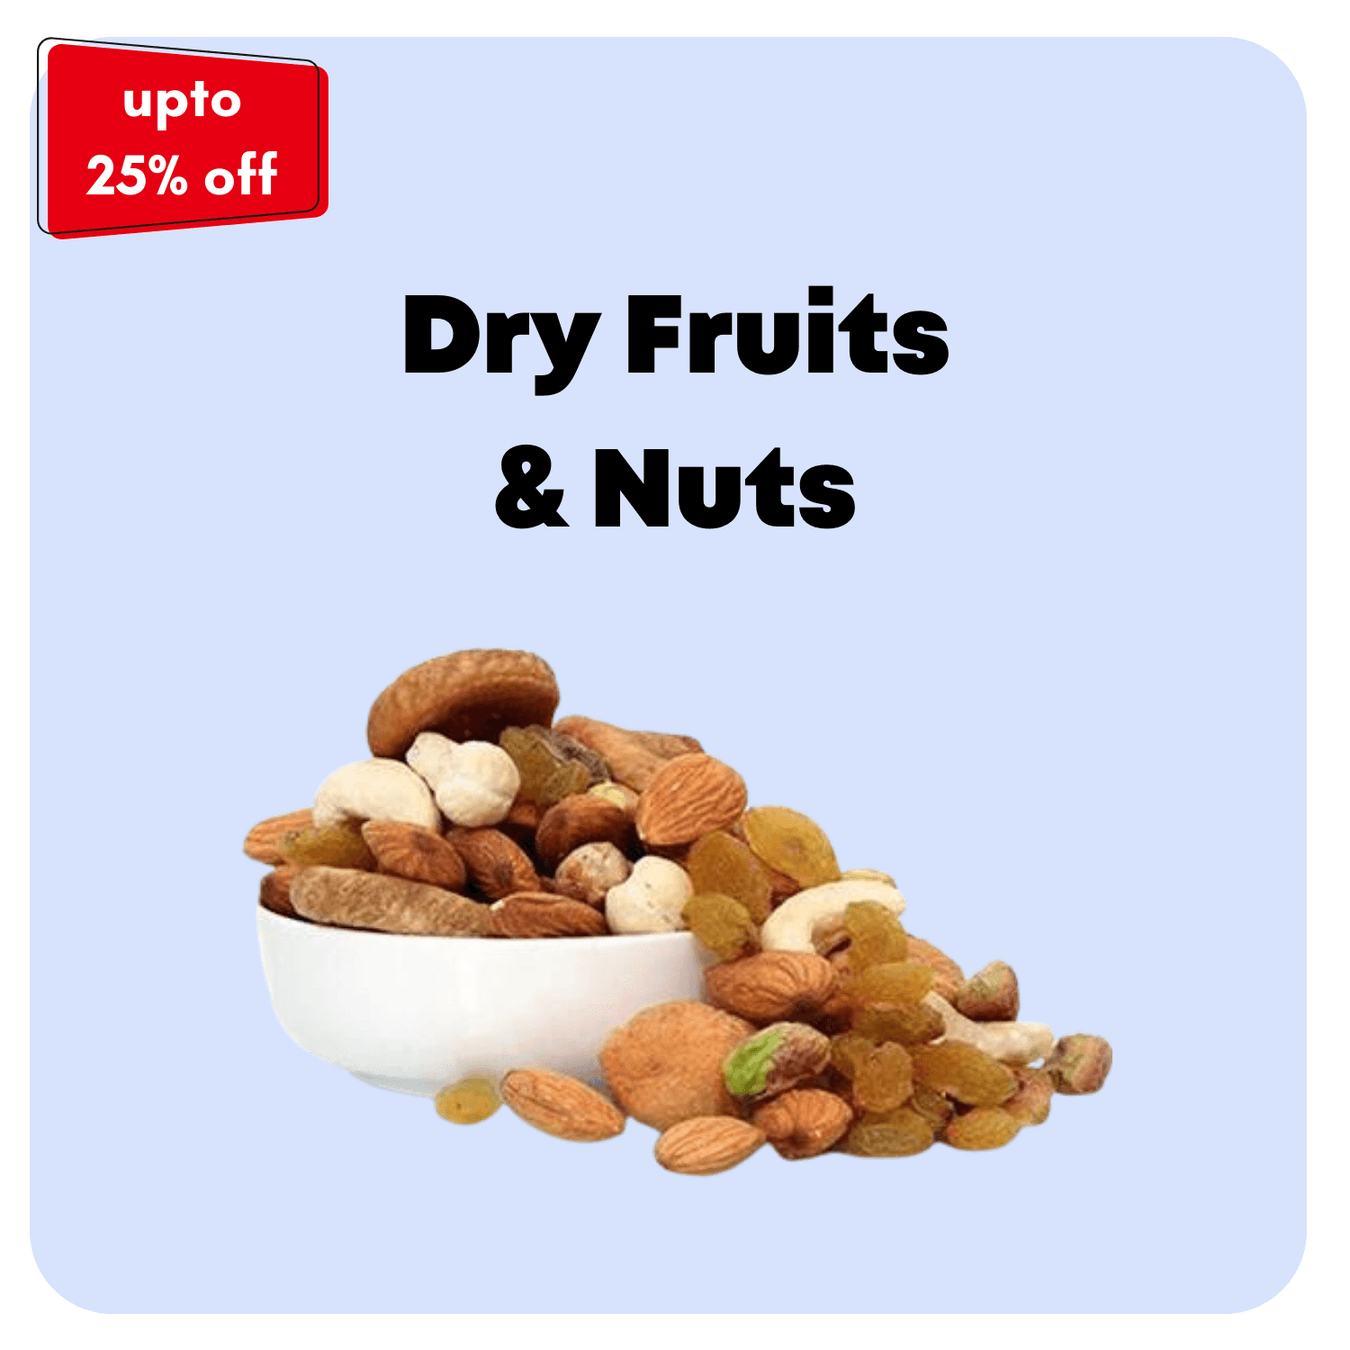 Dry Fruits & Nuts - Quick Pantry